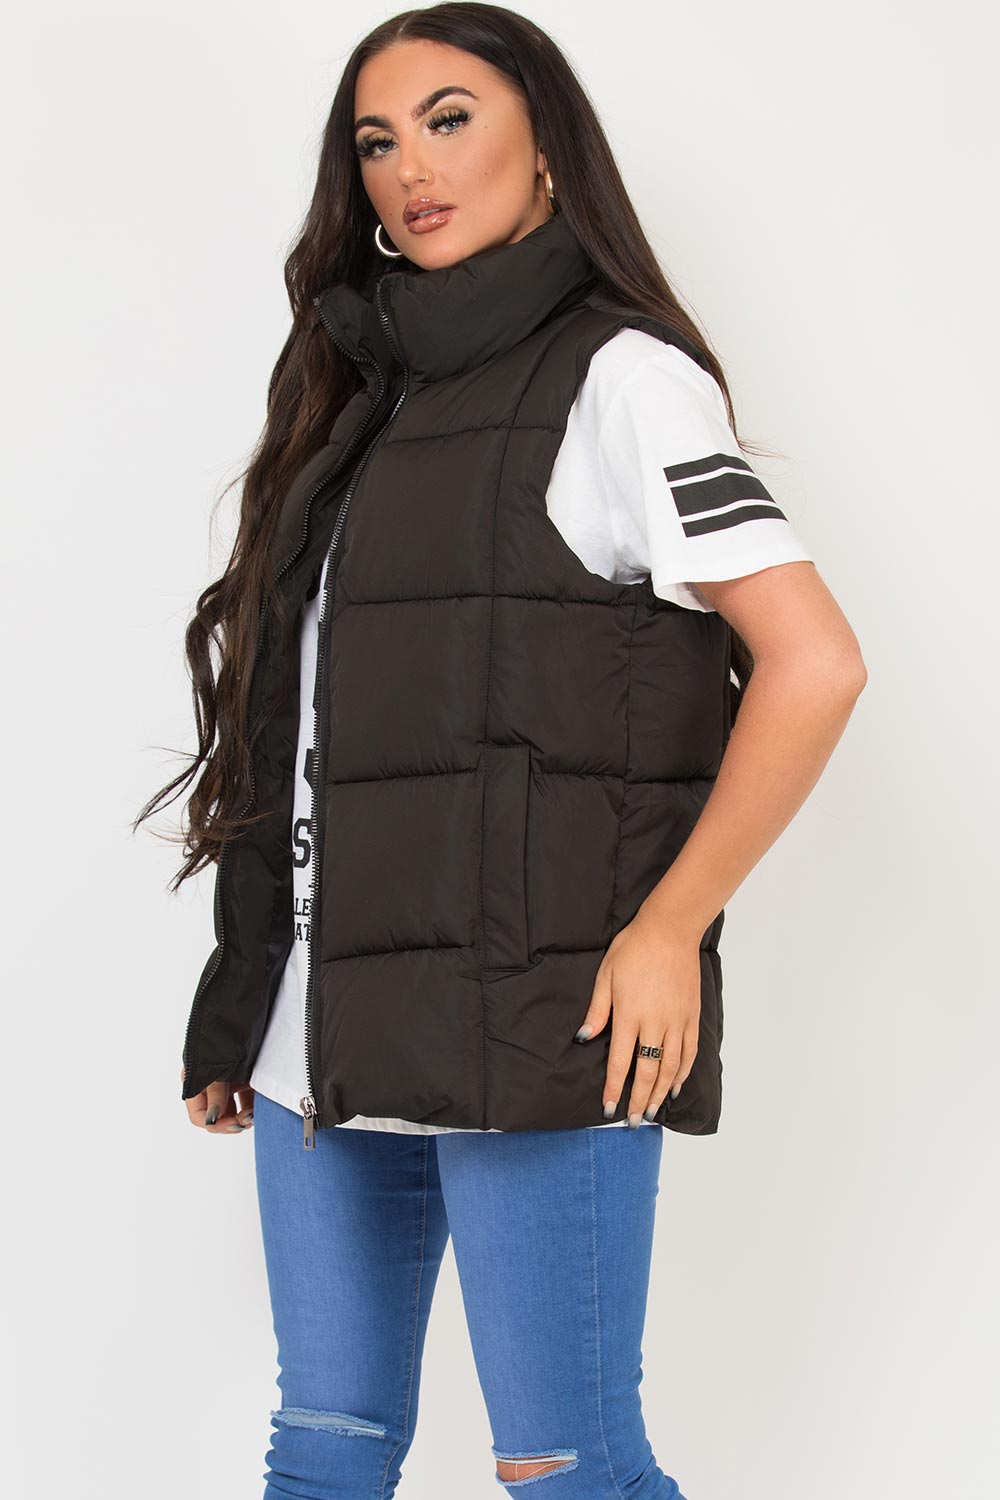 north face gilet womens